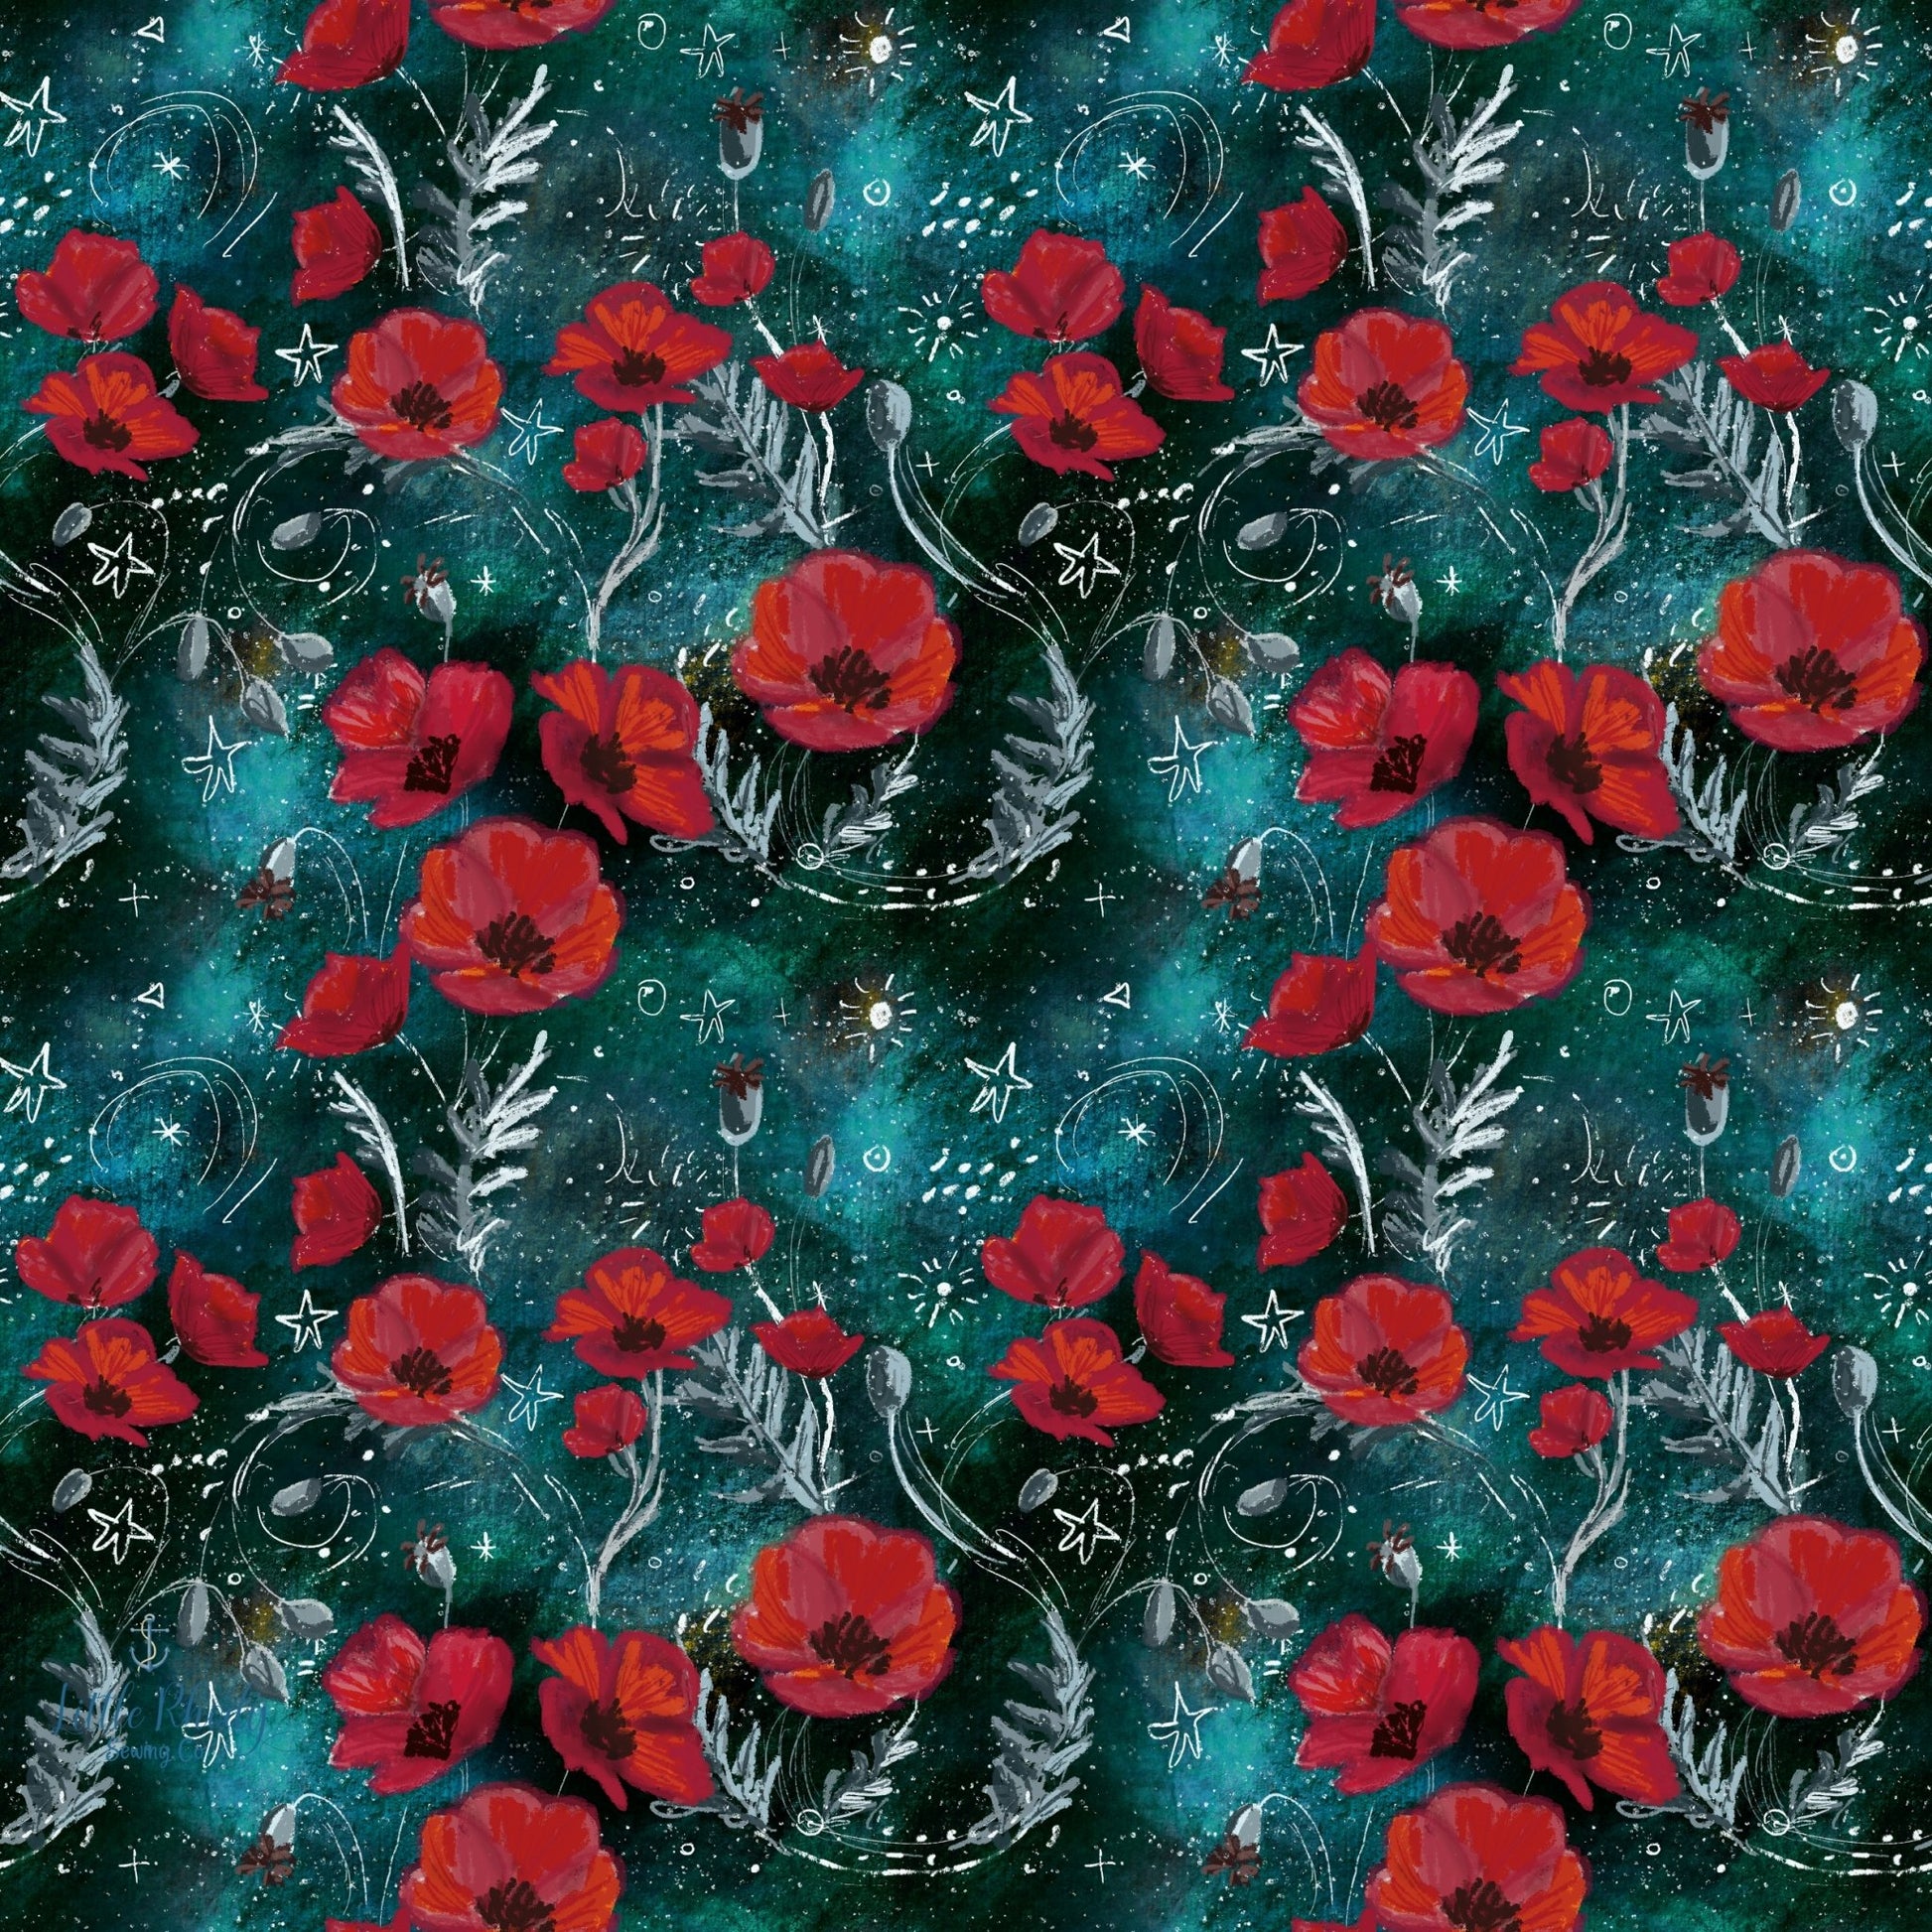 Poppies at Night - Tatra Cottage - Cotton Lycra Jersey - By the 1/2 Yard - Little Rhody Sewing Co.